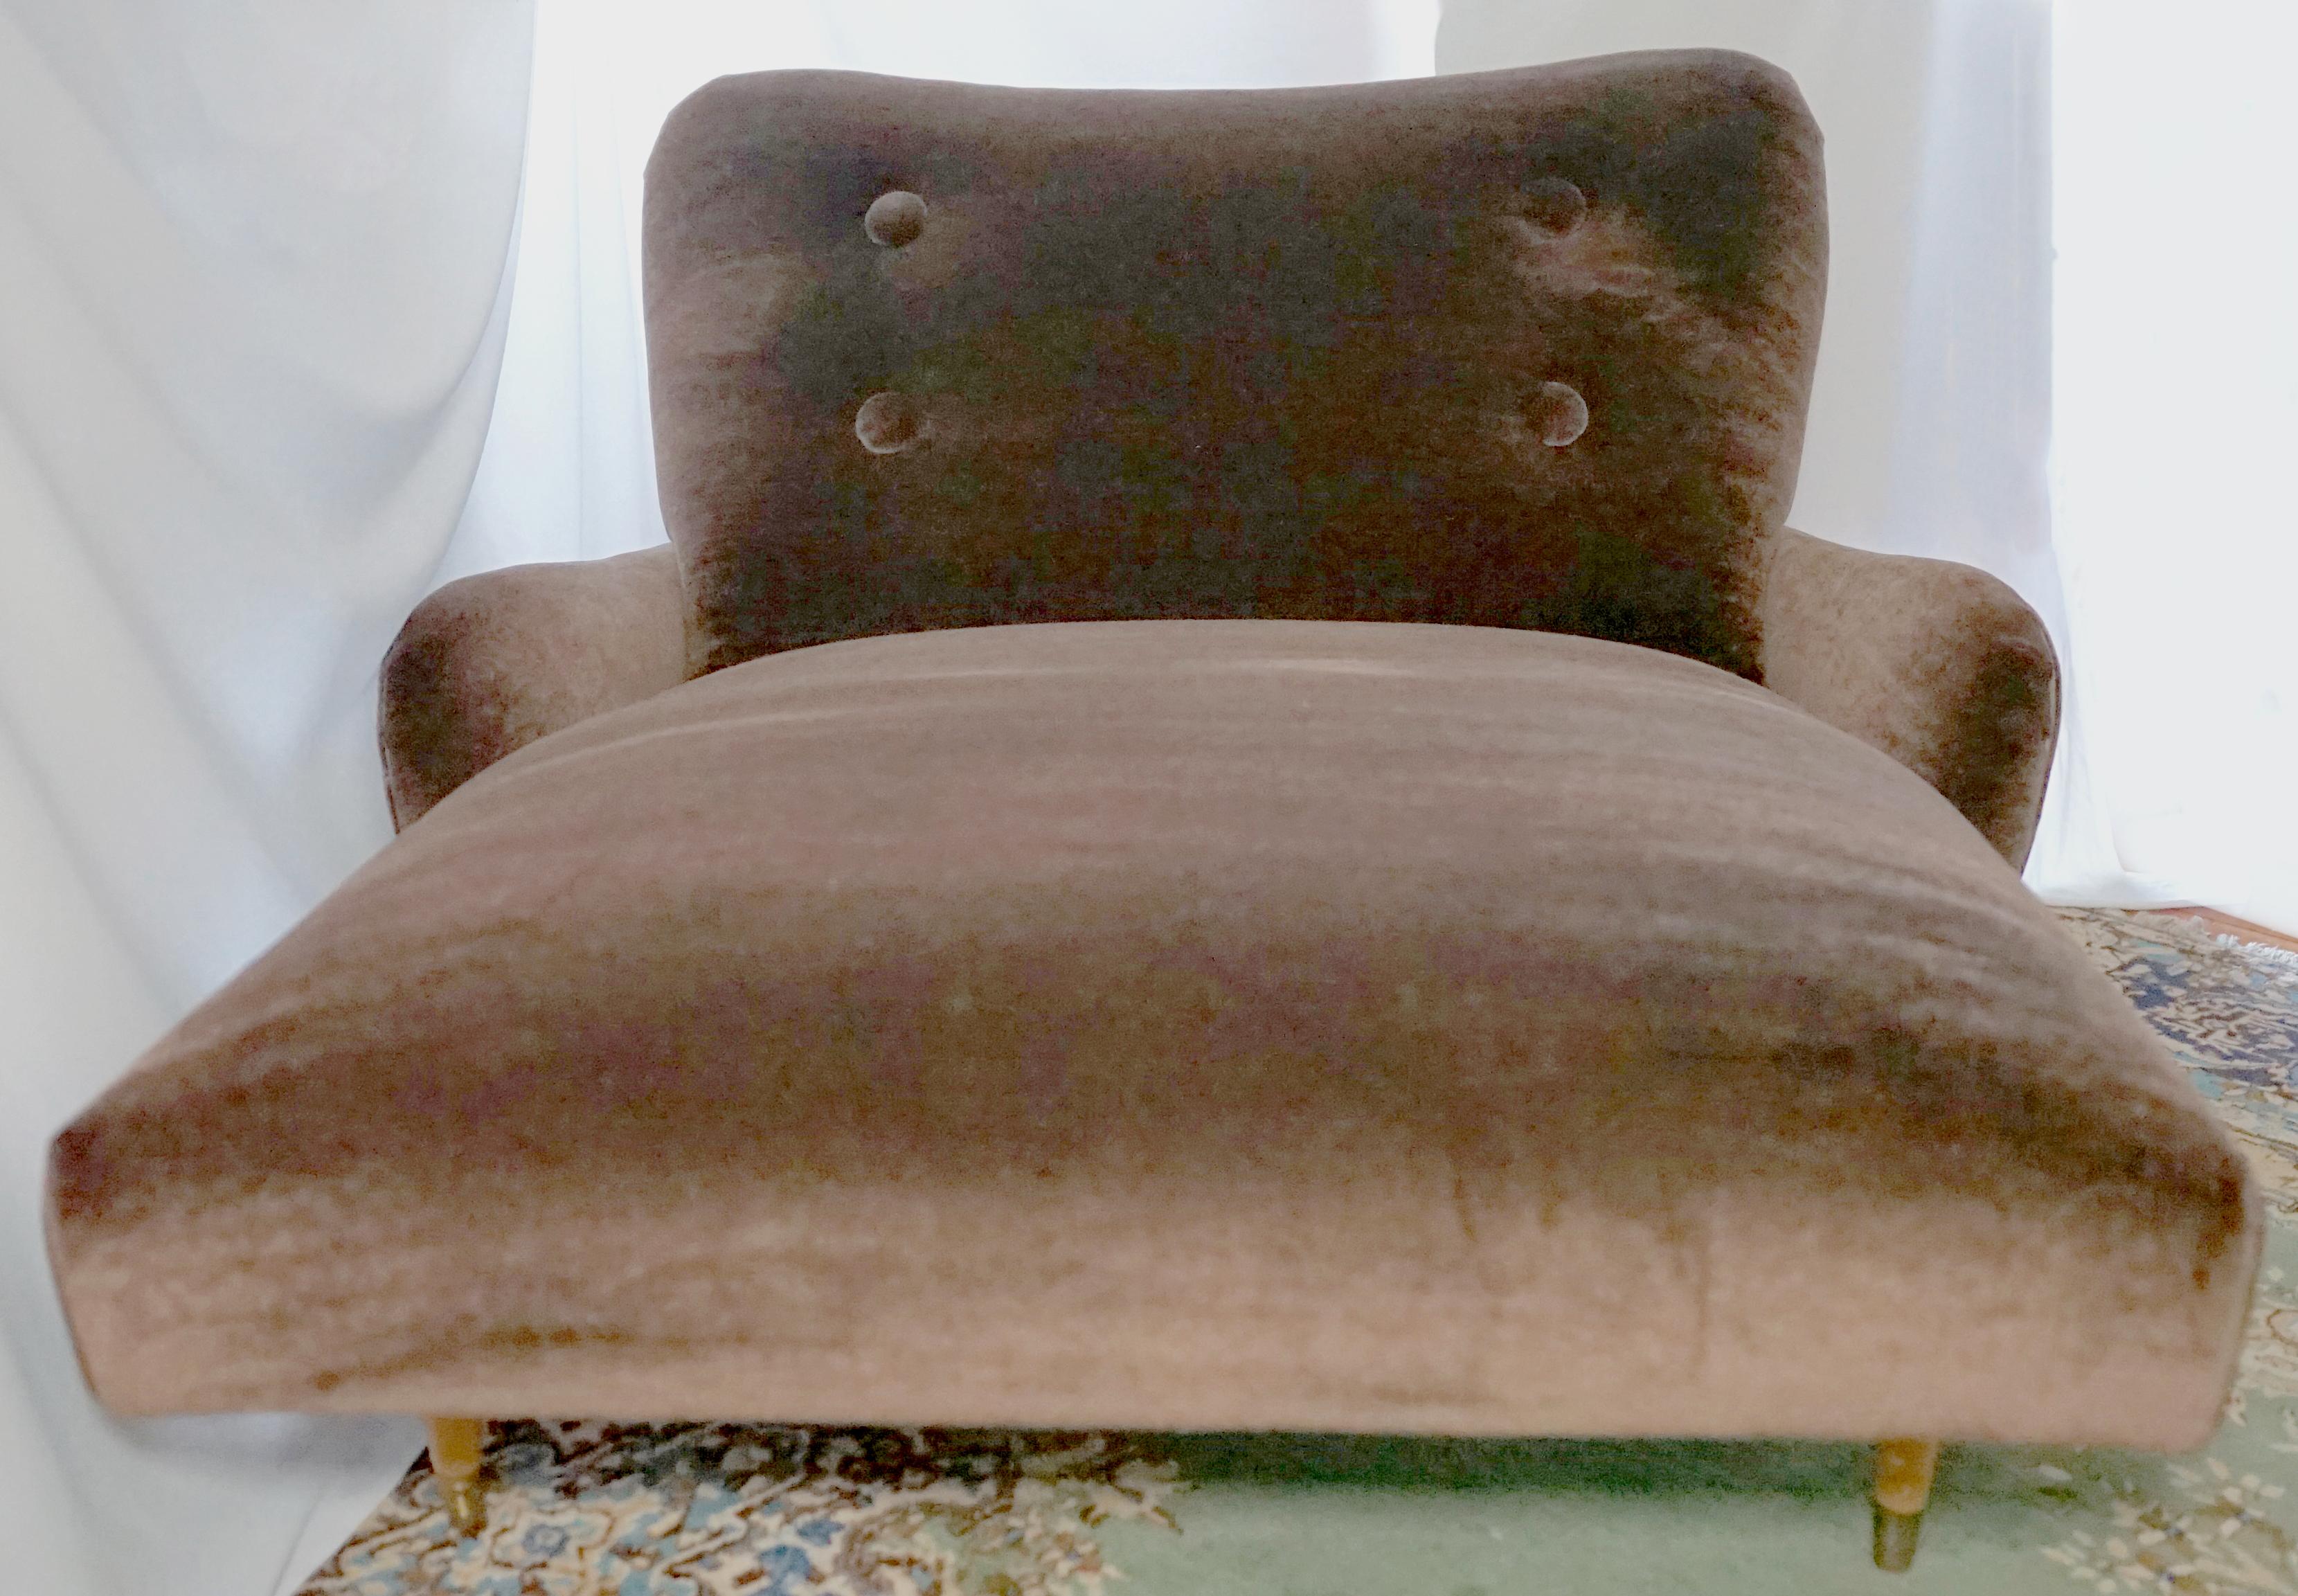 Form, function, and luxury meet here with the beauty of mohair in chocolate velvet pile that covers a super-sized super-elegant, mid century chaise lounge.
Finer than cashmere, more durable than wool, this fabric choice approaches the top without